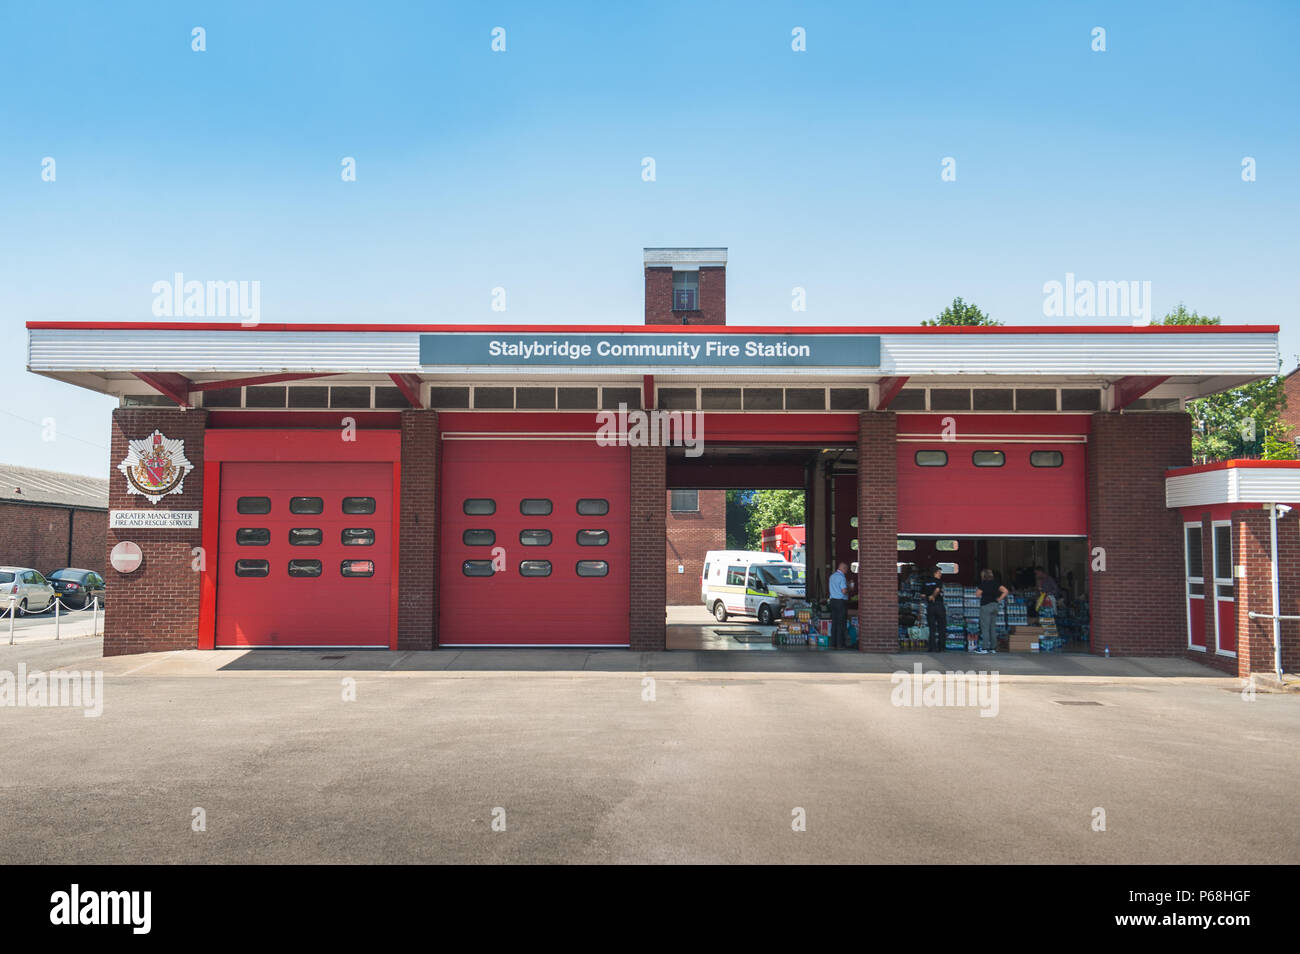 Stalybridge Fire Station, Greater Manchester, UK. 29th June, 2018. Stalybridge Community Fire Station, the hub of attempts to control the Saddleworth Moor fire emergency. Stalybridge, Greater Manchester on Friday 29th June 2018. Credit: Matthew Wilkinson/Alamy Live News Stock Photo